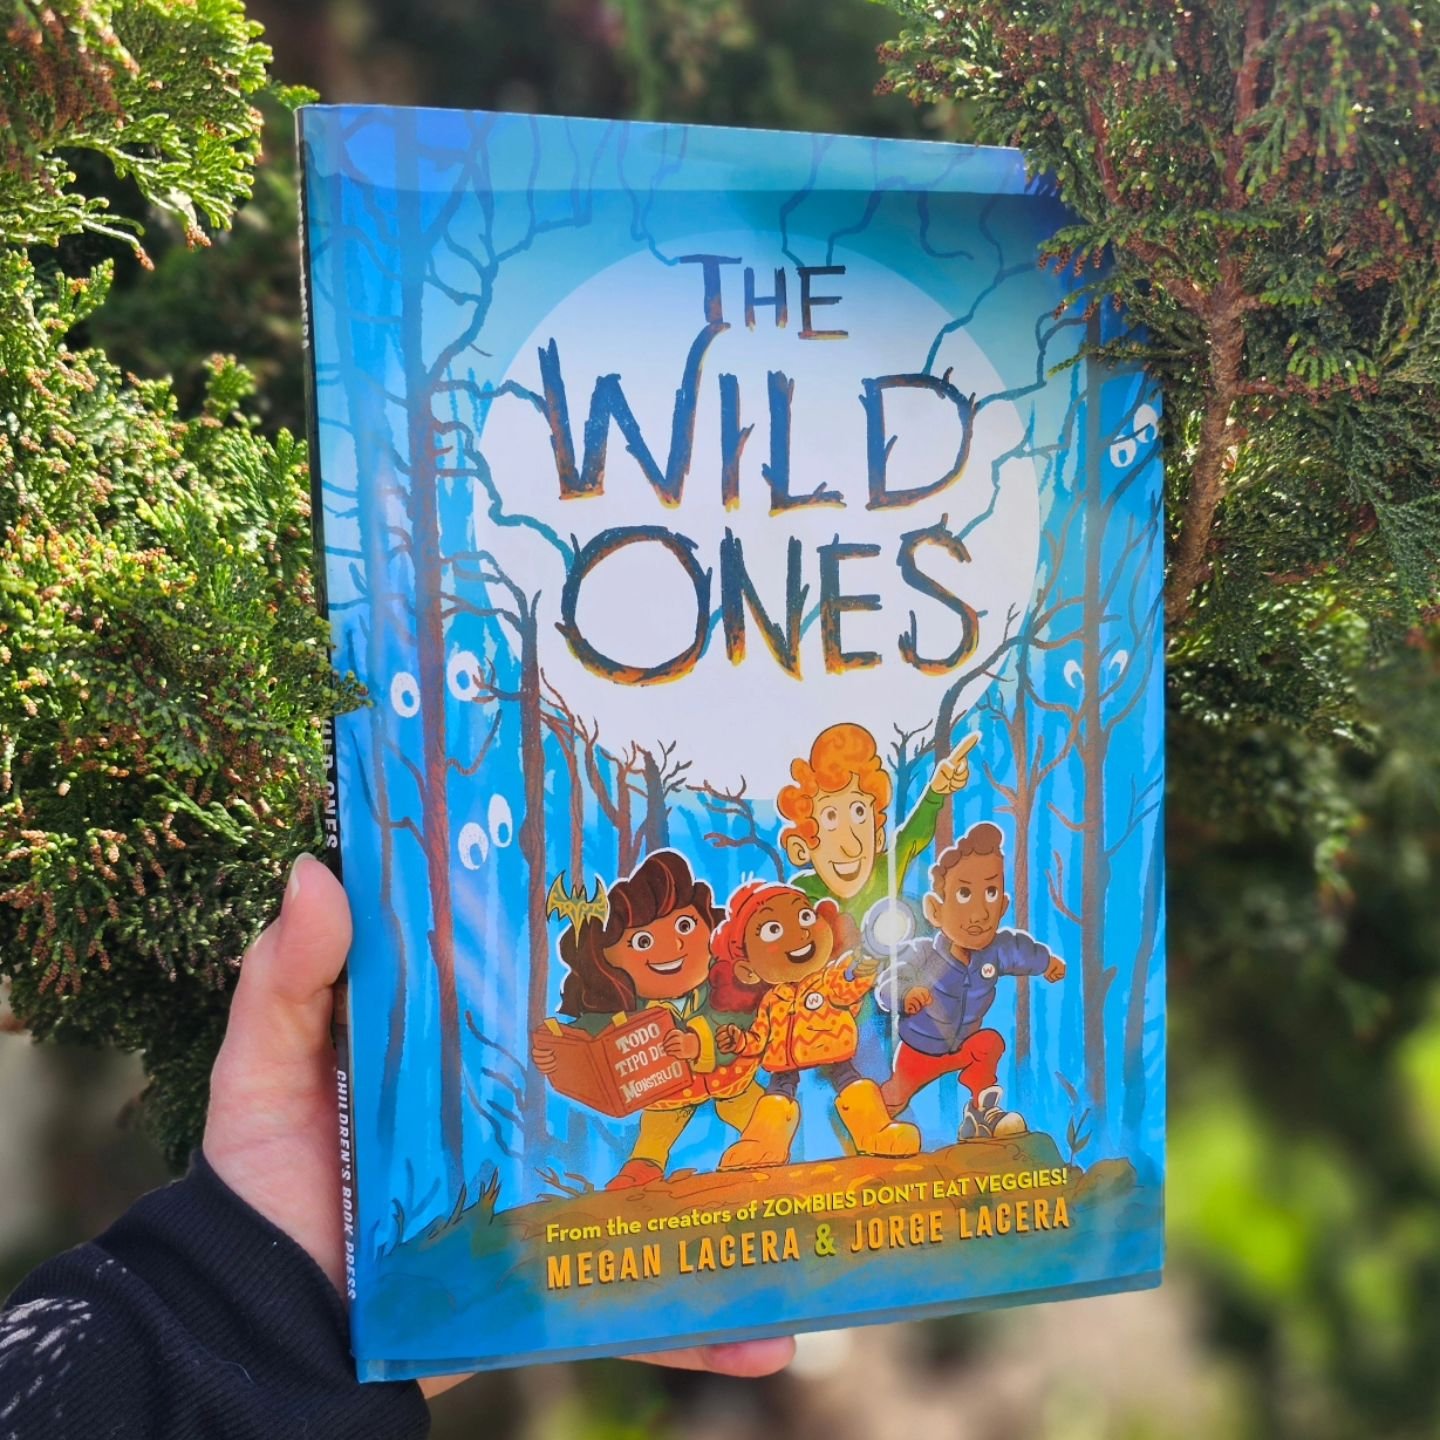 Happy book birthday to THE WILD ONES by @authormeganlacera &amp; @jorgelaceracreates 🎉🎂📚

Absolutely adore this fun, friendship-filled story full of all sorts of wild things! ✨️
--
#amreading #Kidlit #picturebook #picturebooks #kidlitbooks